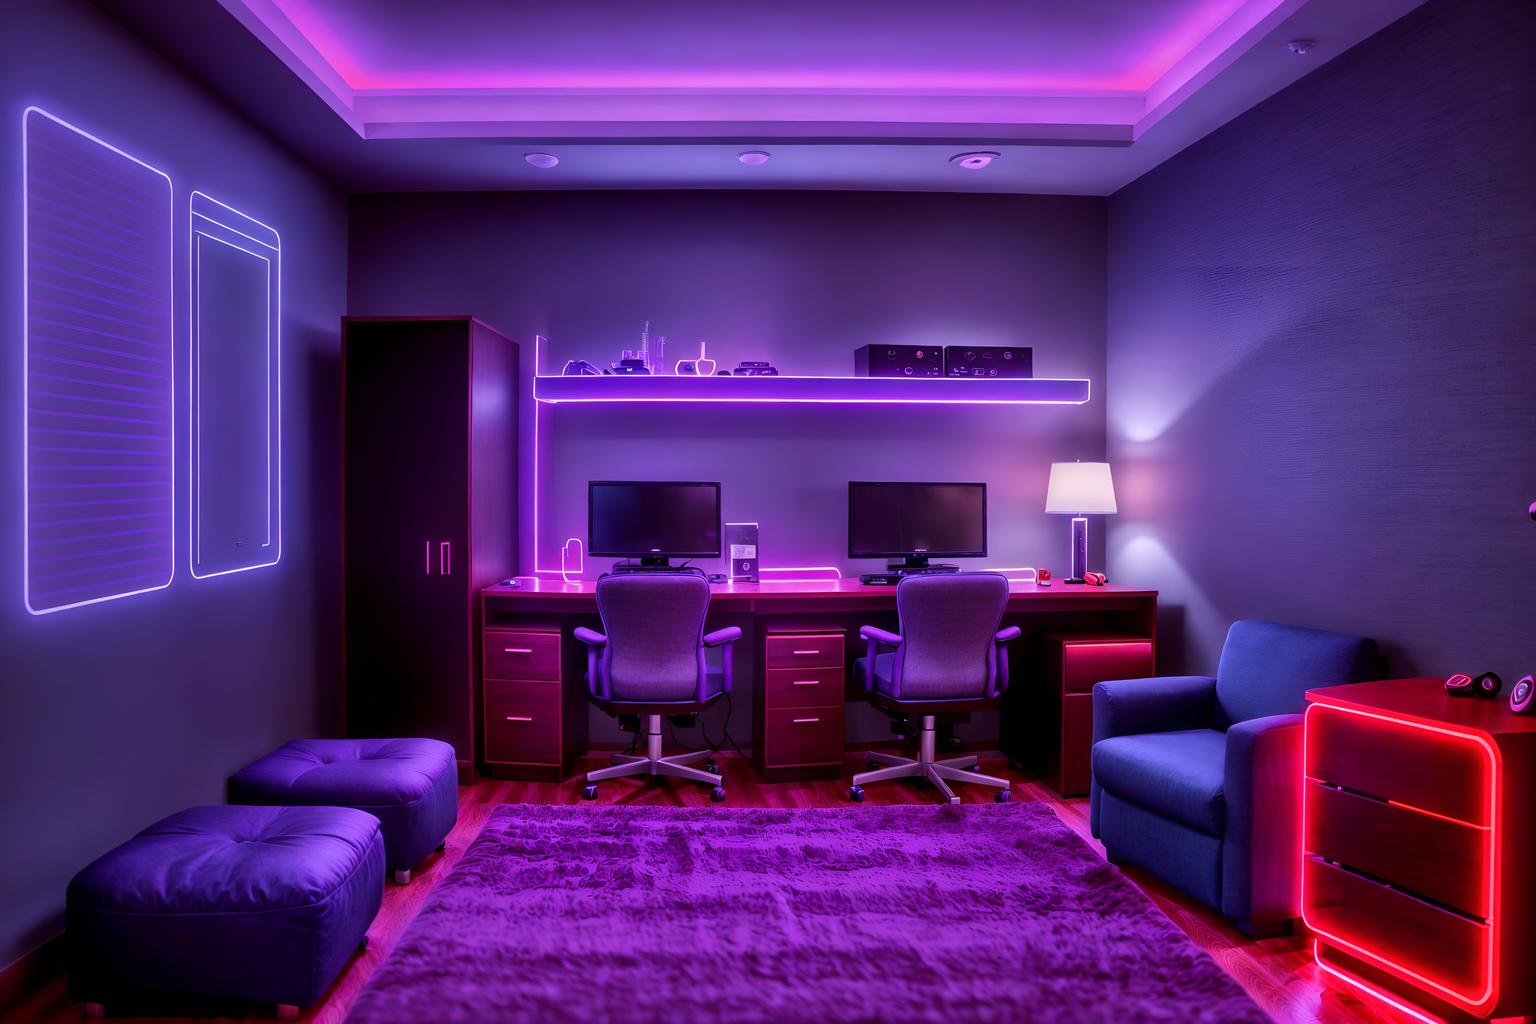 gaming room-style (hotel room interior) with hotel bathroom and bed and headboard and mirror and storage bench or ottoman and dresser closet and accent chair and plant. . with speakers and purple and red lights and multiple displays and purple, red and blue fade light and dark walls and computer desk with computer displays and keyboard and neon letters on wall and dark room. . cinematic photo, highly detailed, cinematic lighting, ultra-detailed, ultrarealistic, photorealism, 8k. gaming room interior design style. masterpiece, cinematic light, ultrarealistic+, photorealistic+, 8k, raw photo, realistic, sharp focus on eyes, (symmetrical eyes), (intact eyes), hyperrealistic, highest quality, best quality, , highly detailed, masterpiece, best quality, extremely detailed 8k wallpaper, masterpiece, best quality, ultra-detailed, best shadow, detailed background, detailed face, detailed eyes, high contrast, best illumination, detailed face, dulux, caustic, dynamic angle, detailed glow. dramatic lighting. highly detailed, insanely detailed hair, symmetrical, intricate details, professionally retouched, 8k high definition. strong bokeh. award winning photo.